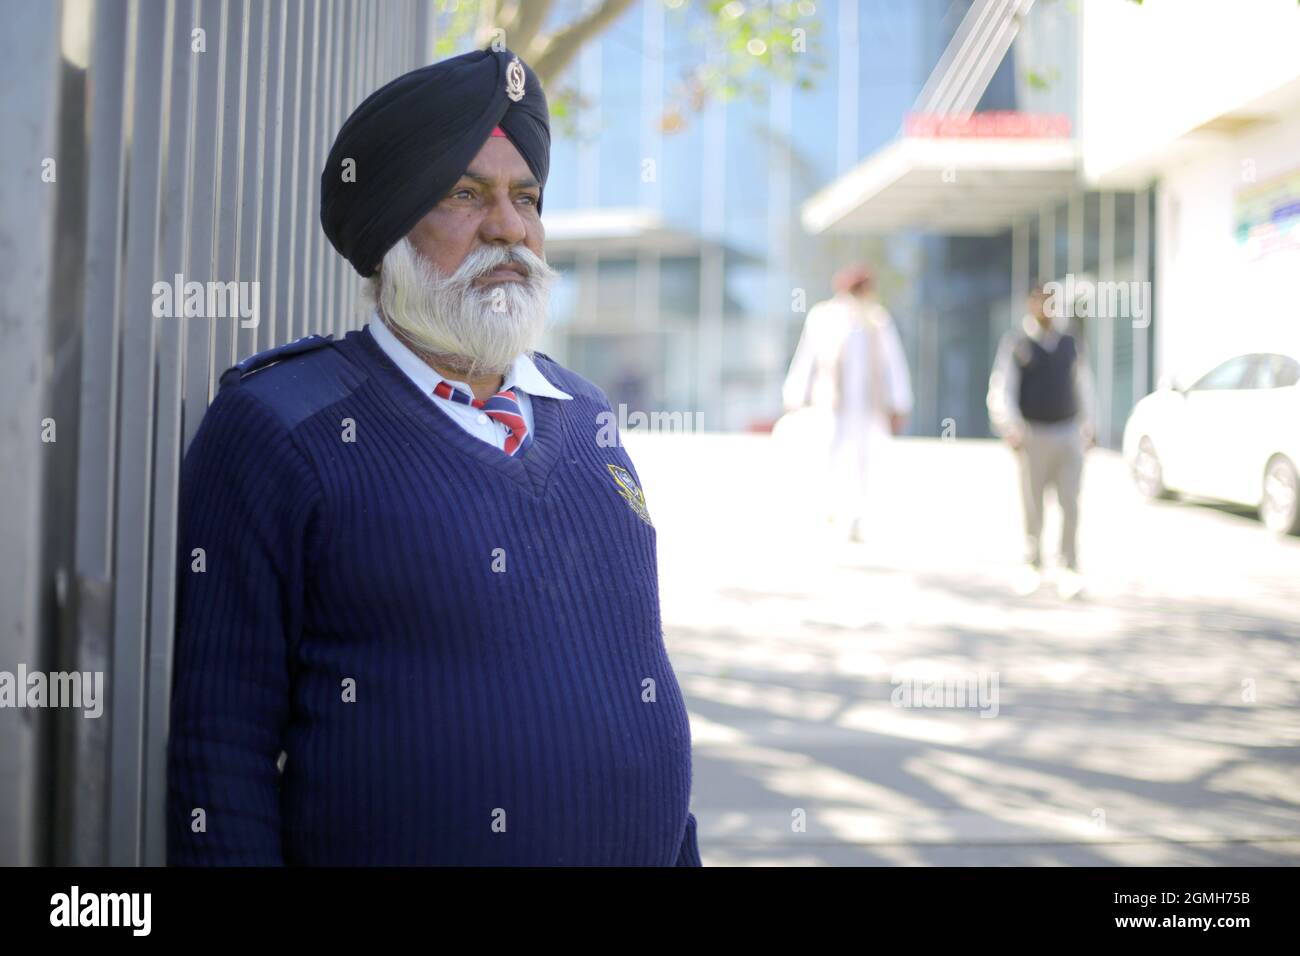 Old Sikh Security guard in blue dress on duty in alert position Stock Photo